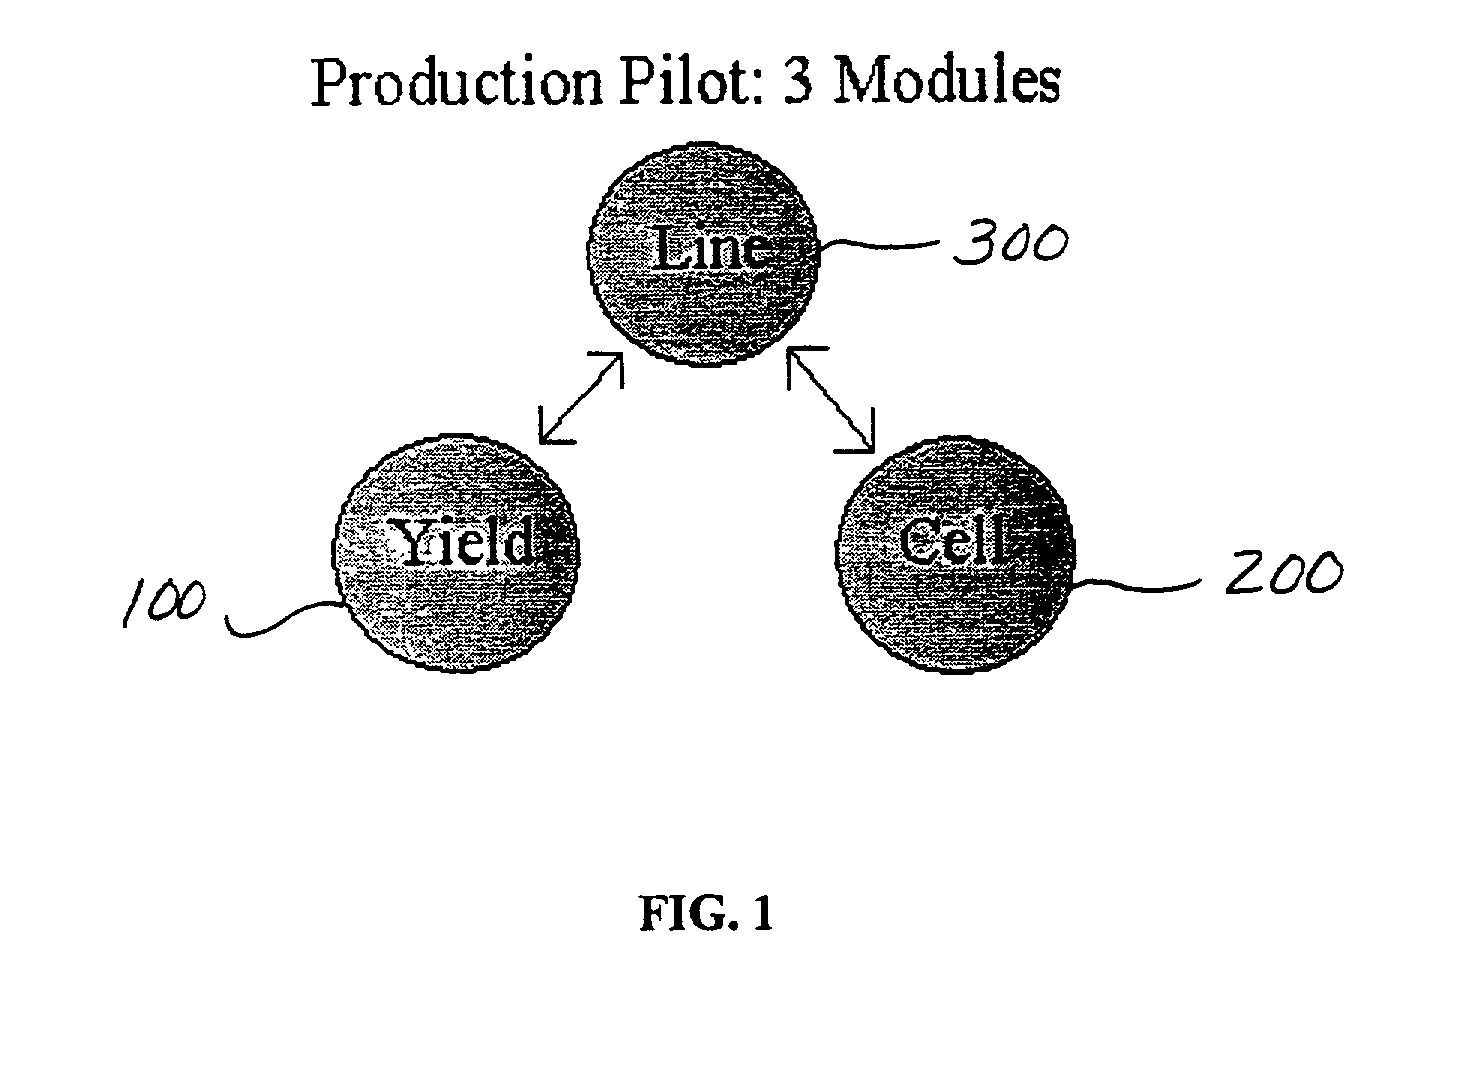 Systems and methods for simulation, analysis and design of automated assembly systems